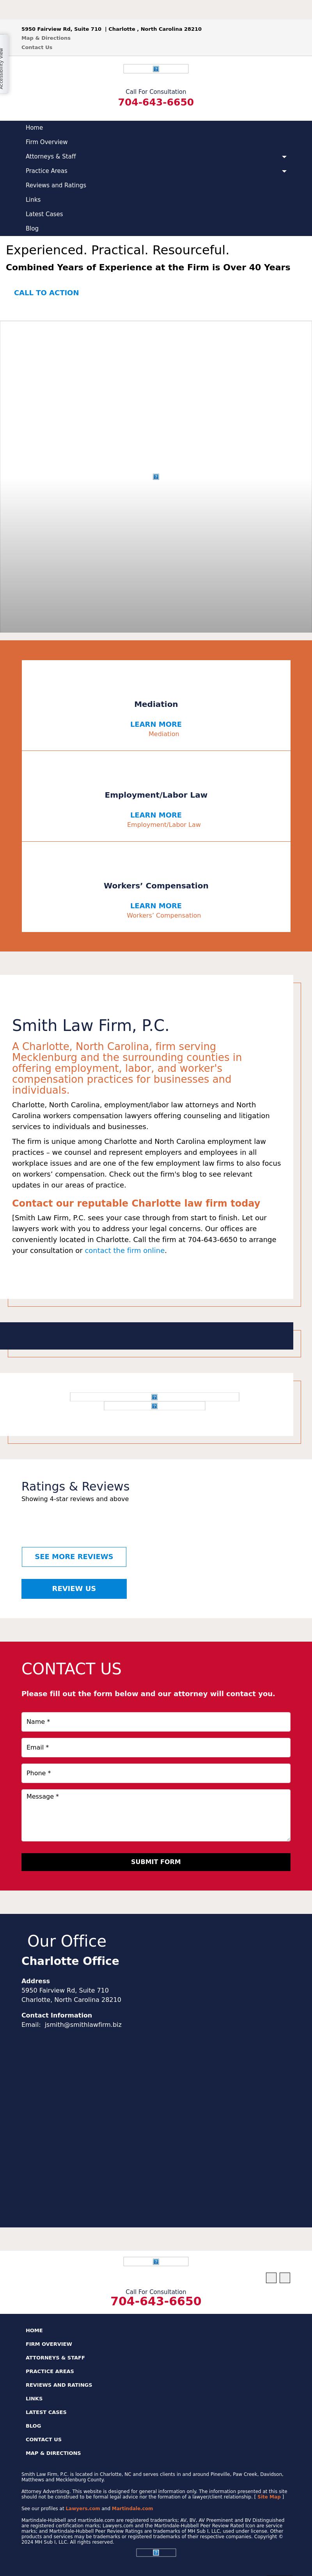 Smith Law Firm, P.C. - Charlotte NC Lawyers